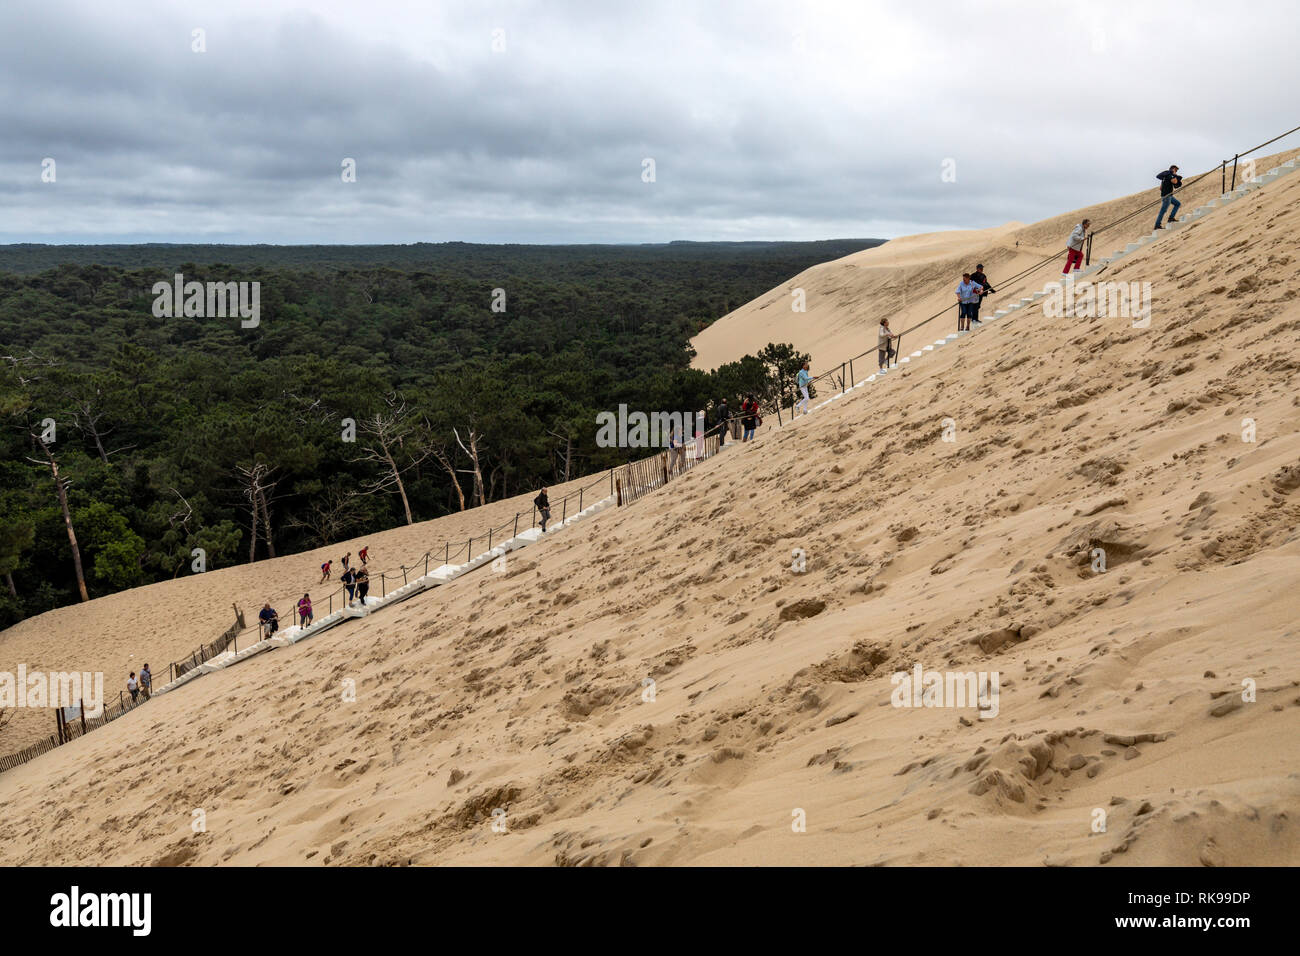 Tourists climbing the Dune of Pilat The the tallest sand dune in Europe located in La Teste-de-Buch in the Arcachon Bay area France, 60 km from Bordea Stock Photo